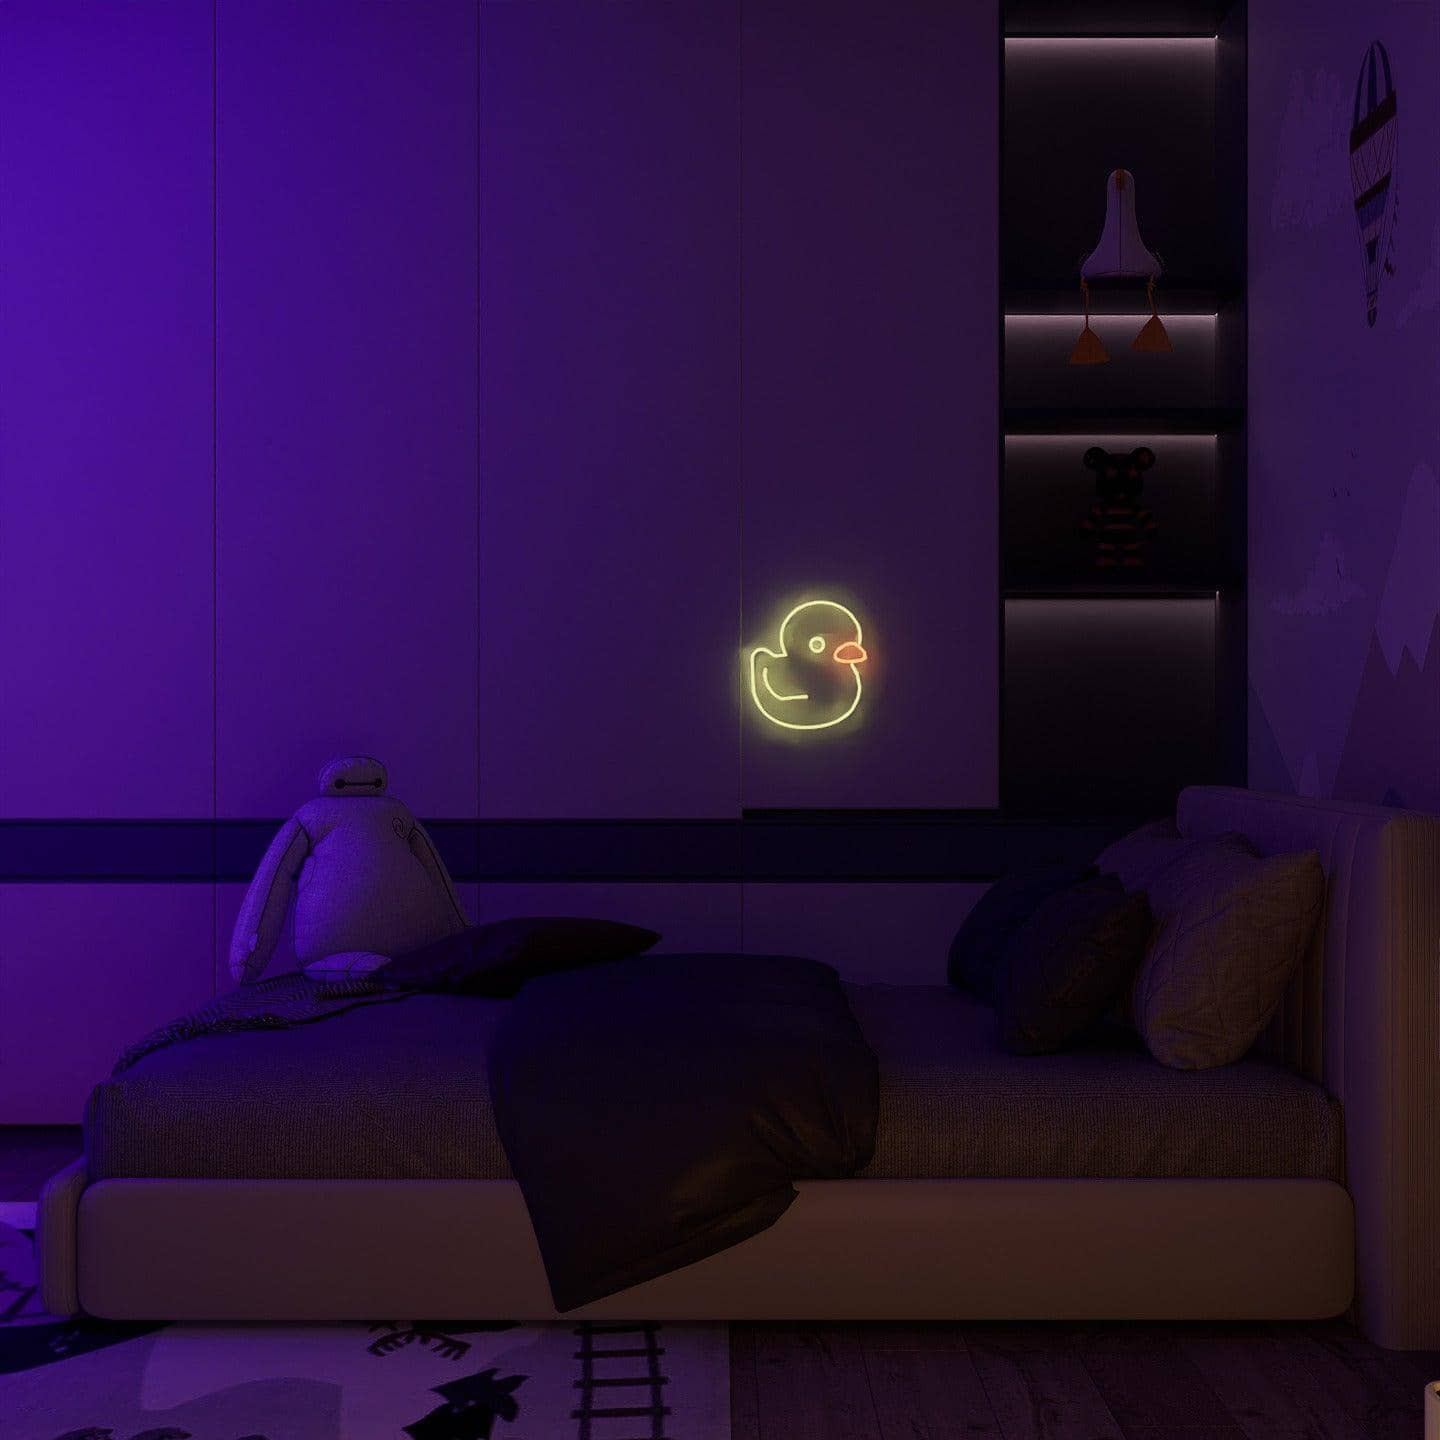 light-up-neon-lights-and-hang-them-in-your-bedroom-for-display-saturn-rubberducky